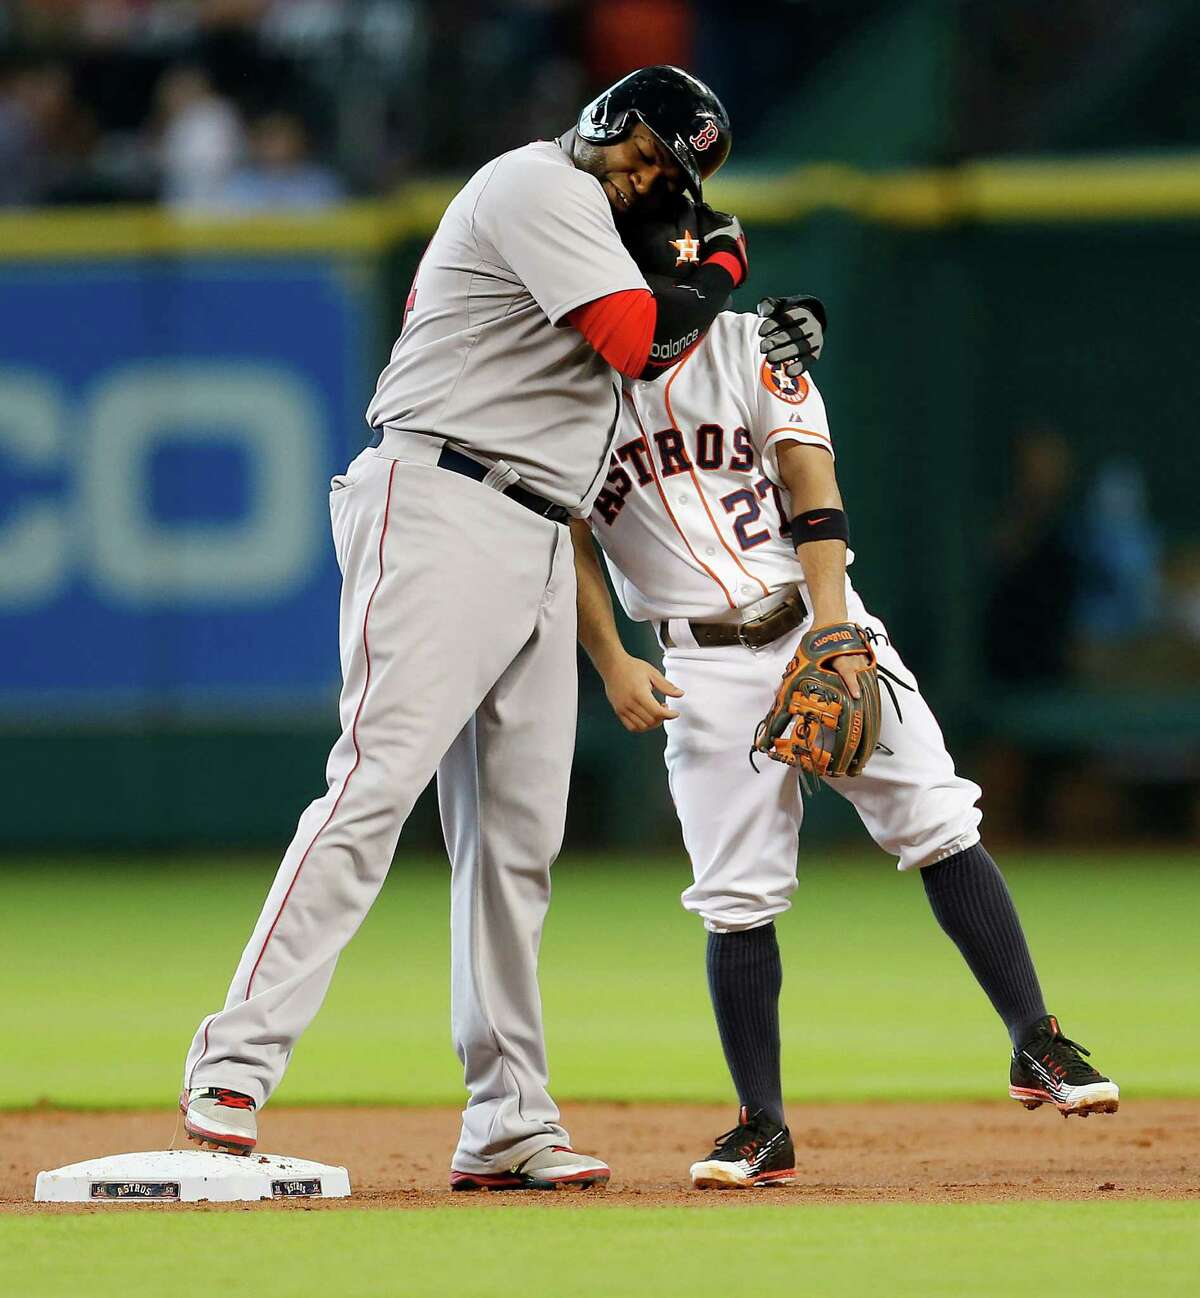 Boston Red Sox designated hitter David Ortiz (34) hugs Houston Astros second baseman Jose Altuve (27) after Ortiz's double during the first inning of an MLB game at Minute Maid Park on Thursday, July 23, 2015, in Houston.